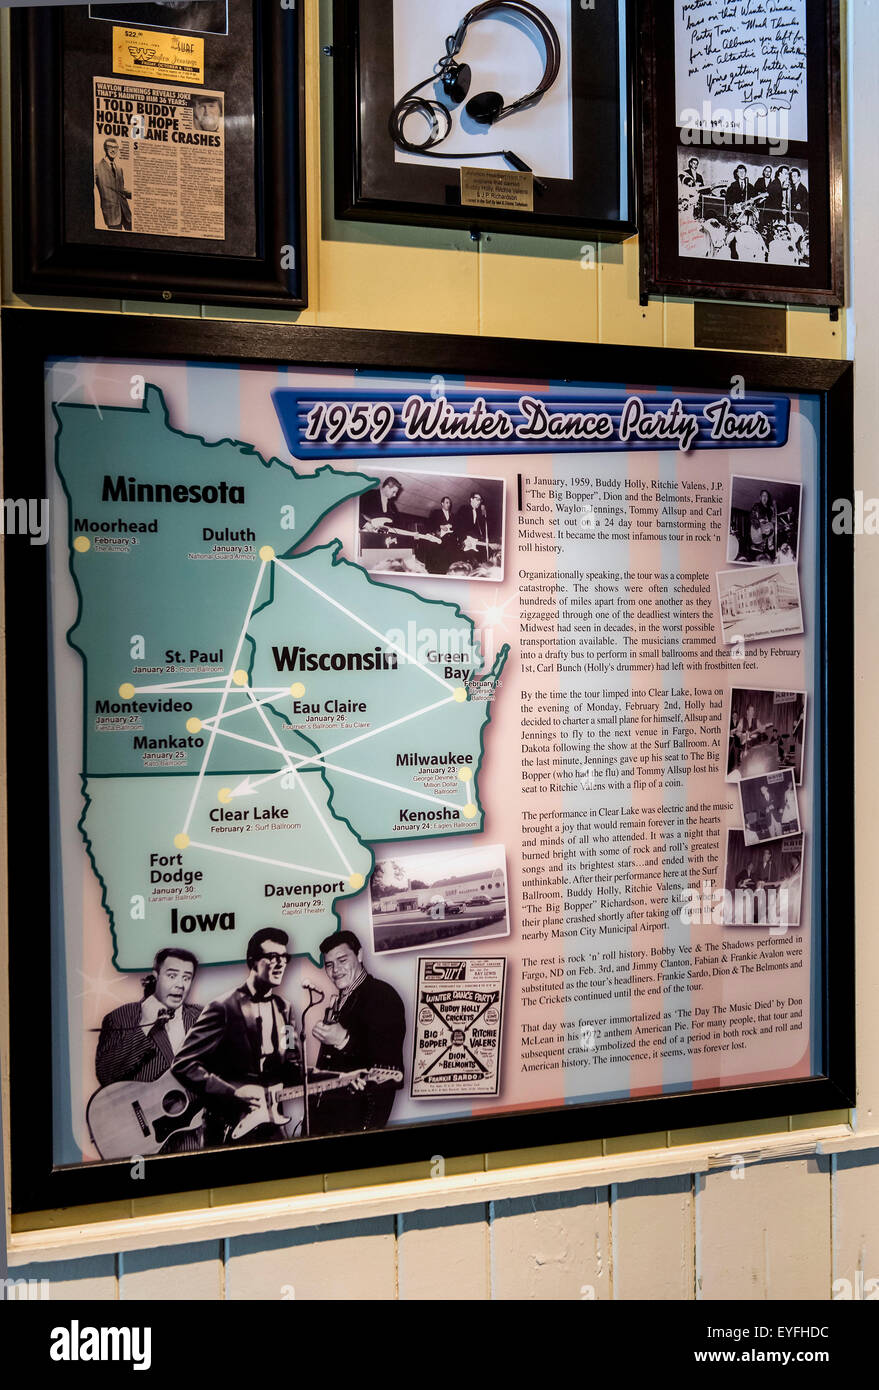 Clear Lake, Iowa, USA. 28th July, 2015. Memorabilia from decades of concerts adorns the walls of the Surf Ballroom in Clear Lake, Iowa, the site of the last concert on the 1959 Winter Dance Party tour before the plane crash on Feb. 3 that took the lives of musicians BUDDY HOLLY, RITCHIE VALENS and J.P. ''THE BIG BOPPER'' RICHARDSON. The Surf, in business at its present location since 1948, has been lovingly maintained as one of the last remaining ballrooms in the midwest. © Brian Cahn/ZUMA Wire/Alamy Live News Stock Photo